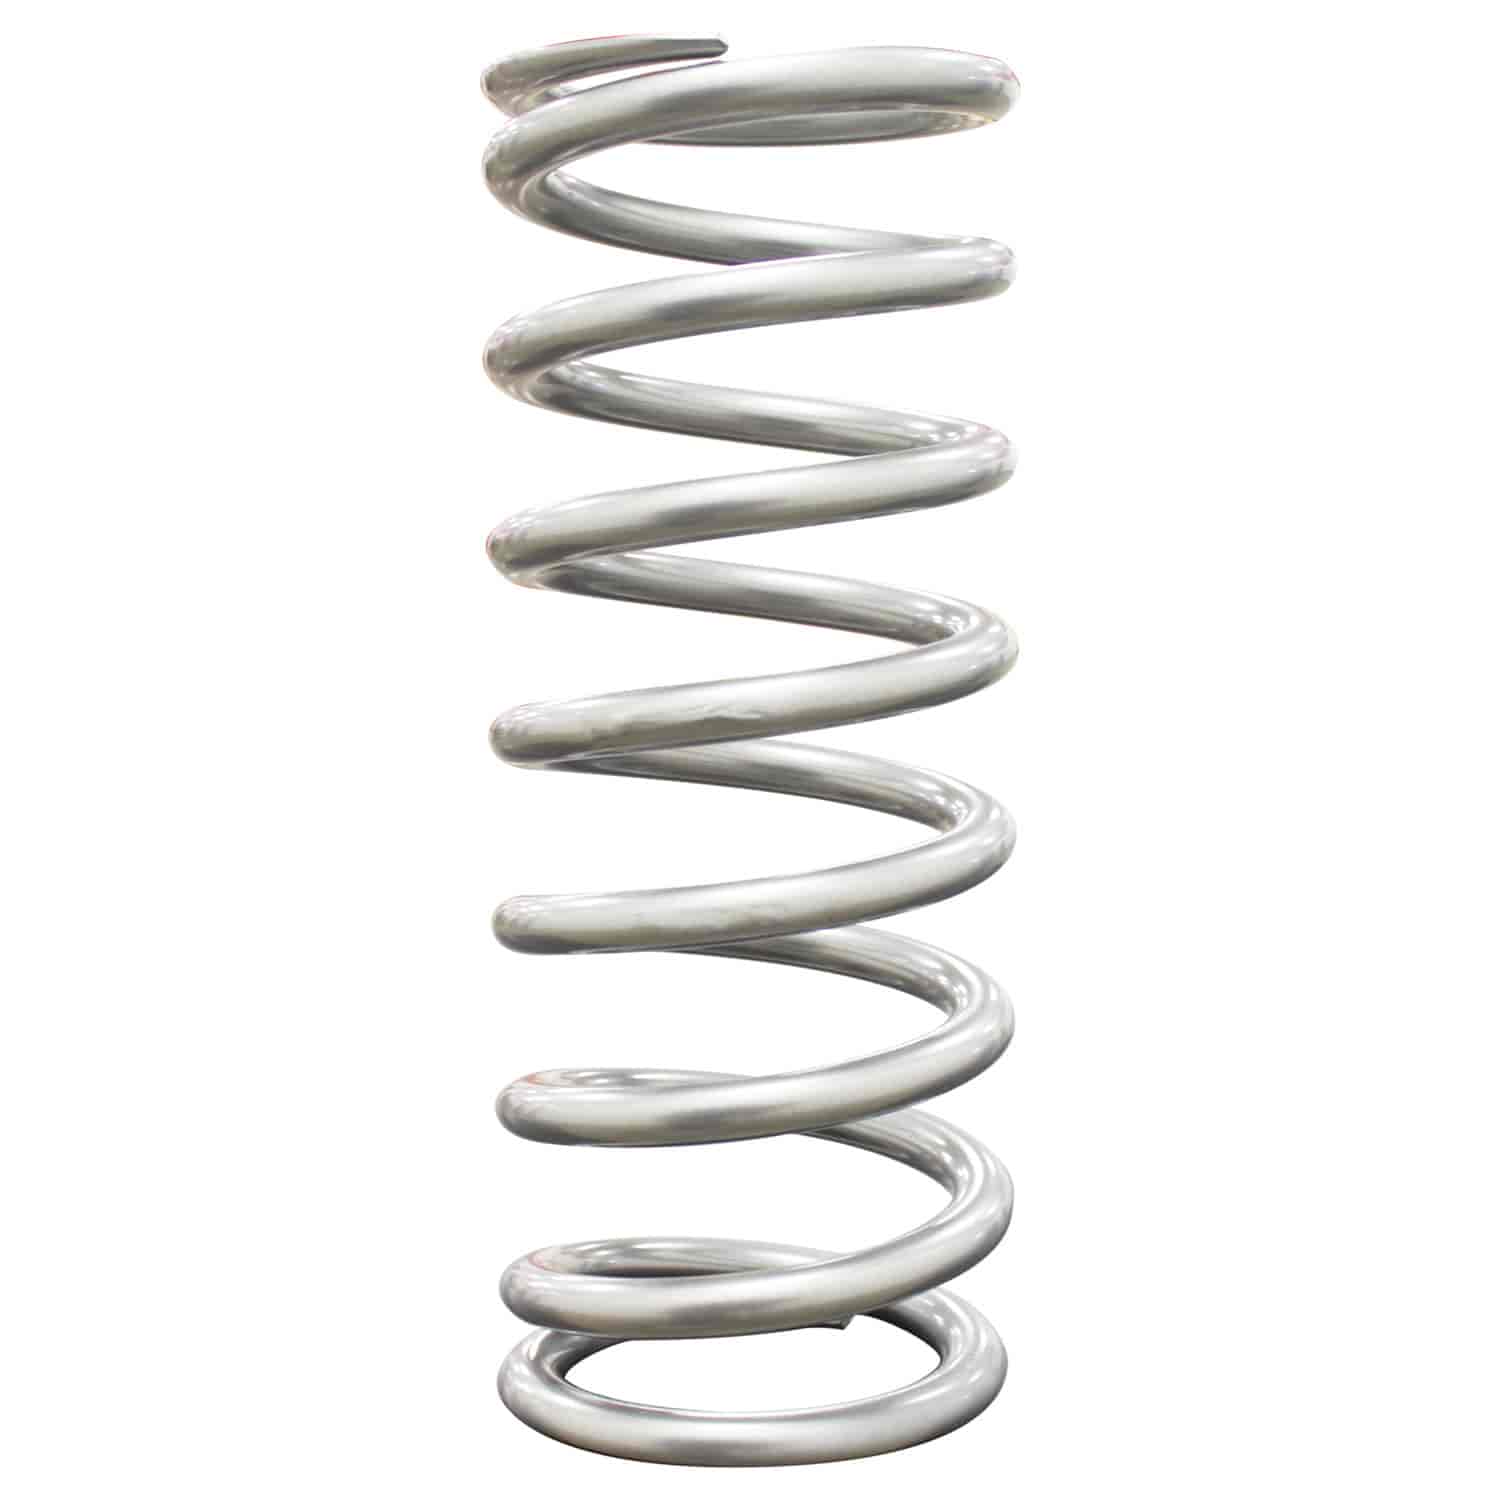 Powder-coated High Travel Coil Spring 10 in. Length